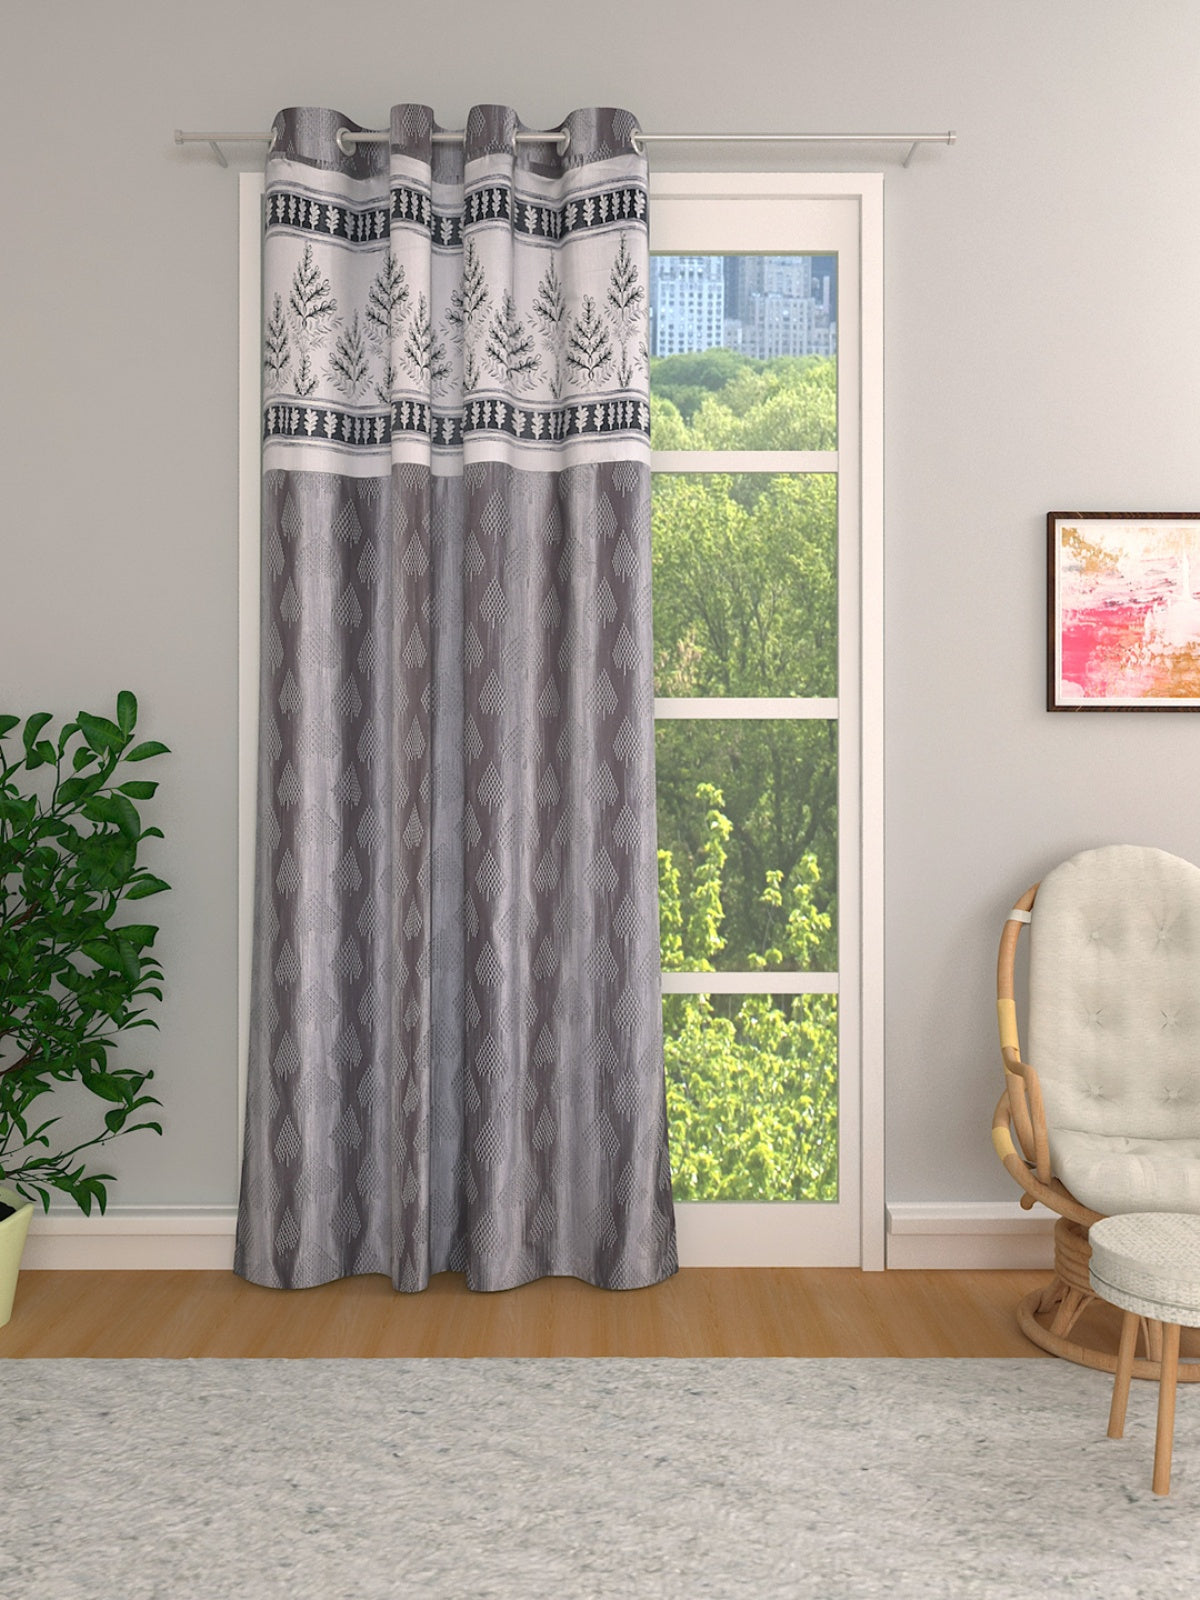 Romee Grey Leafy Patterned Set of 1 Long Door Curtains